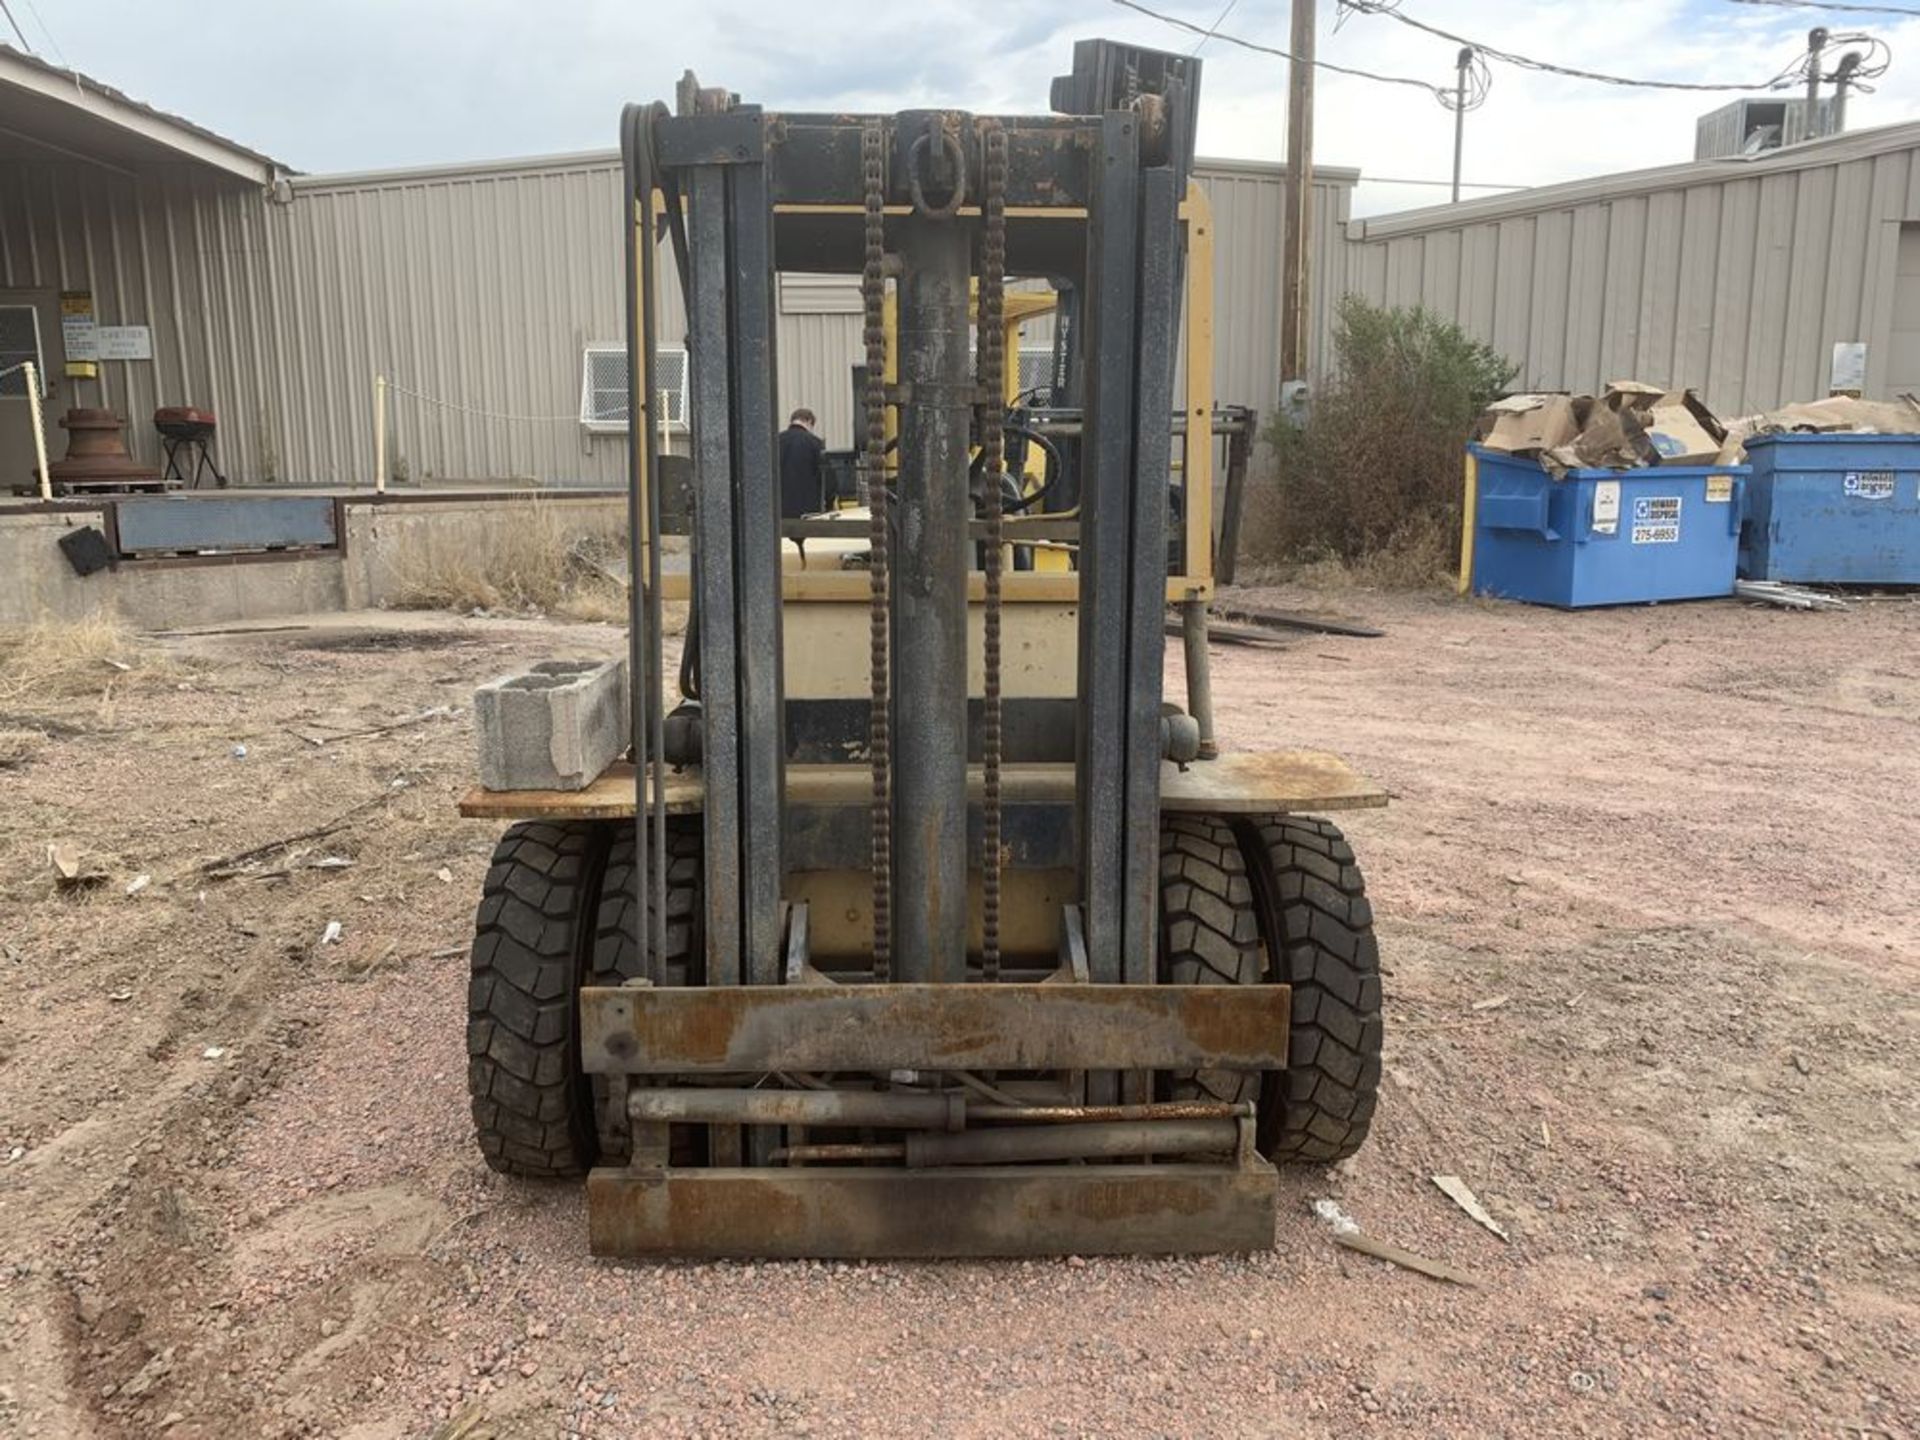 Canon City CO Hyster 8000 forklift, LP, recent pneumatic tires, double mast, running when taken - Image 2 of 7